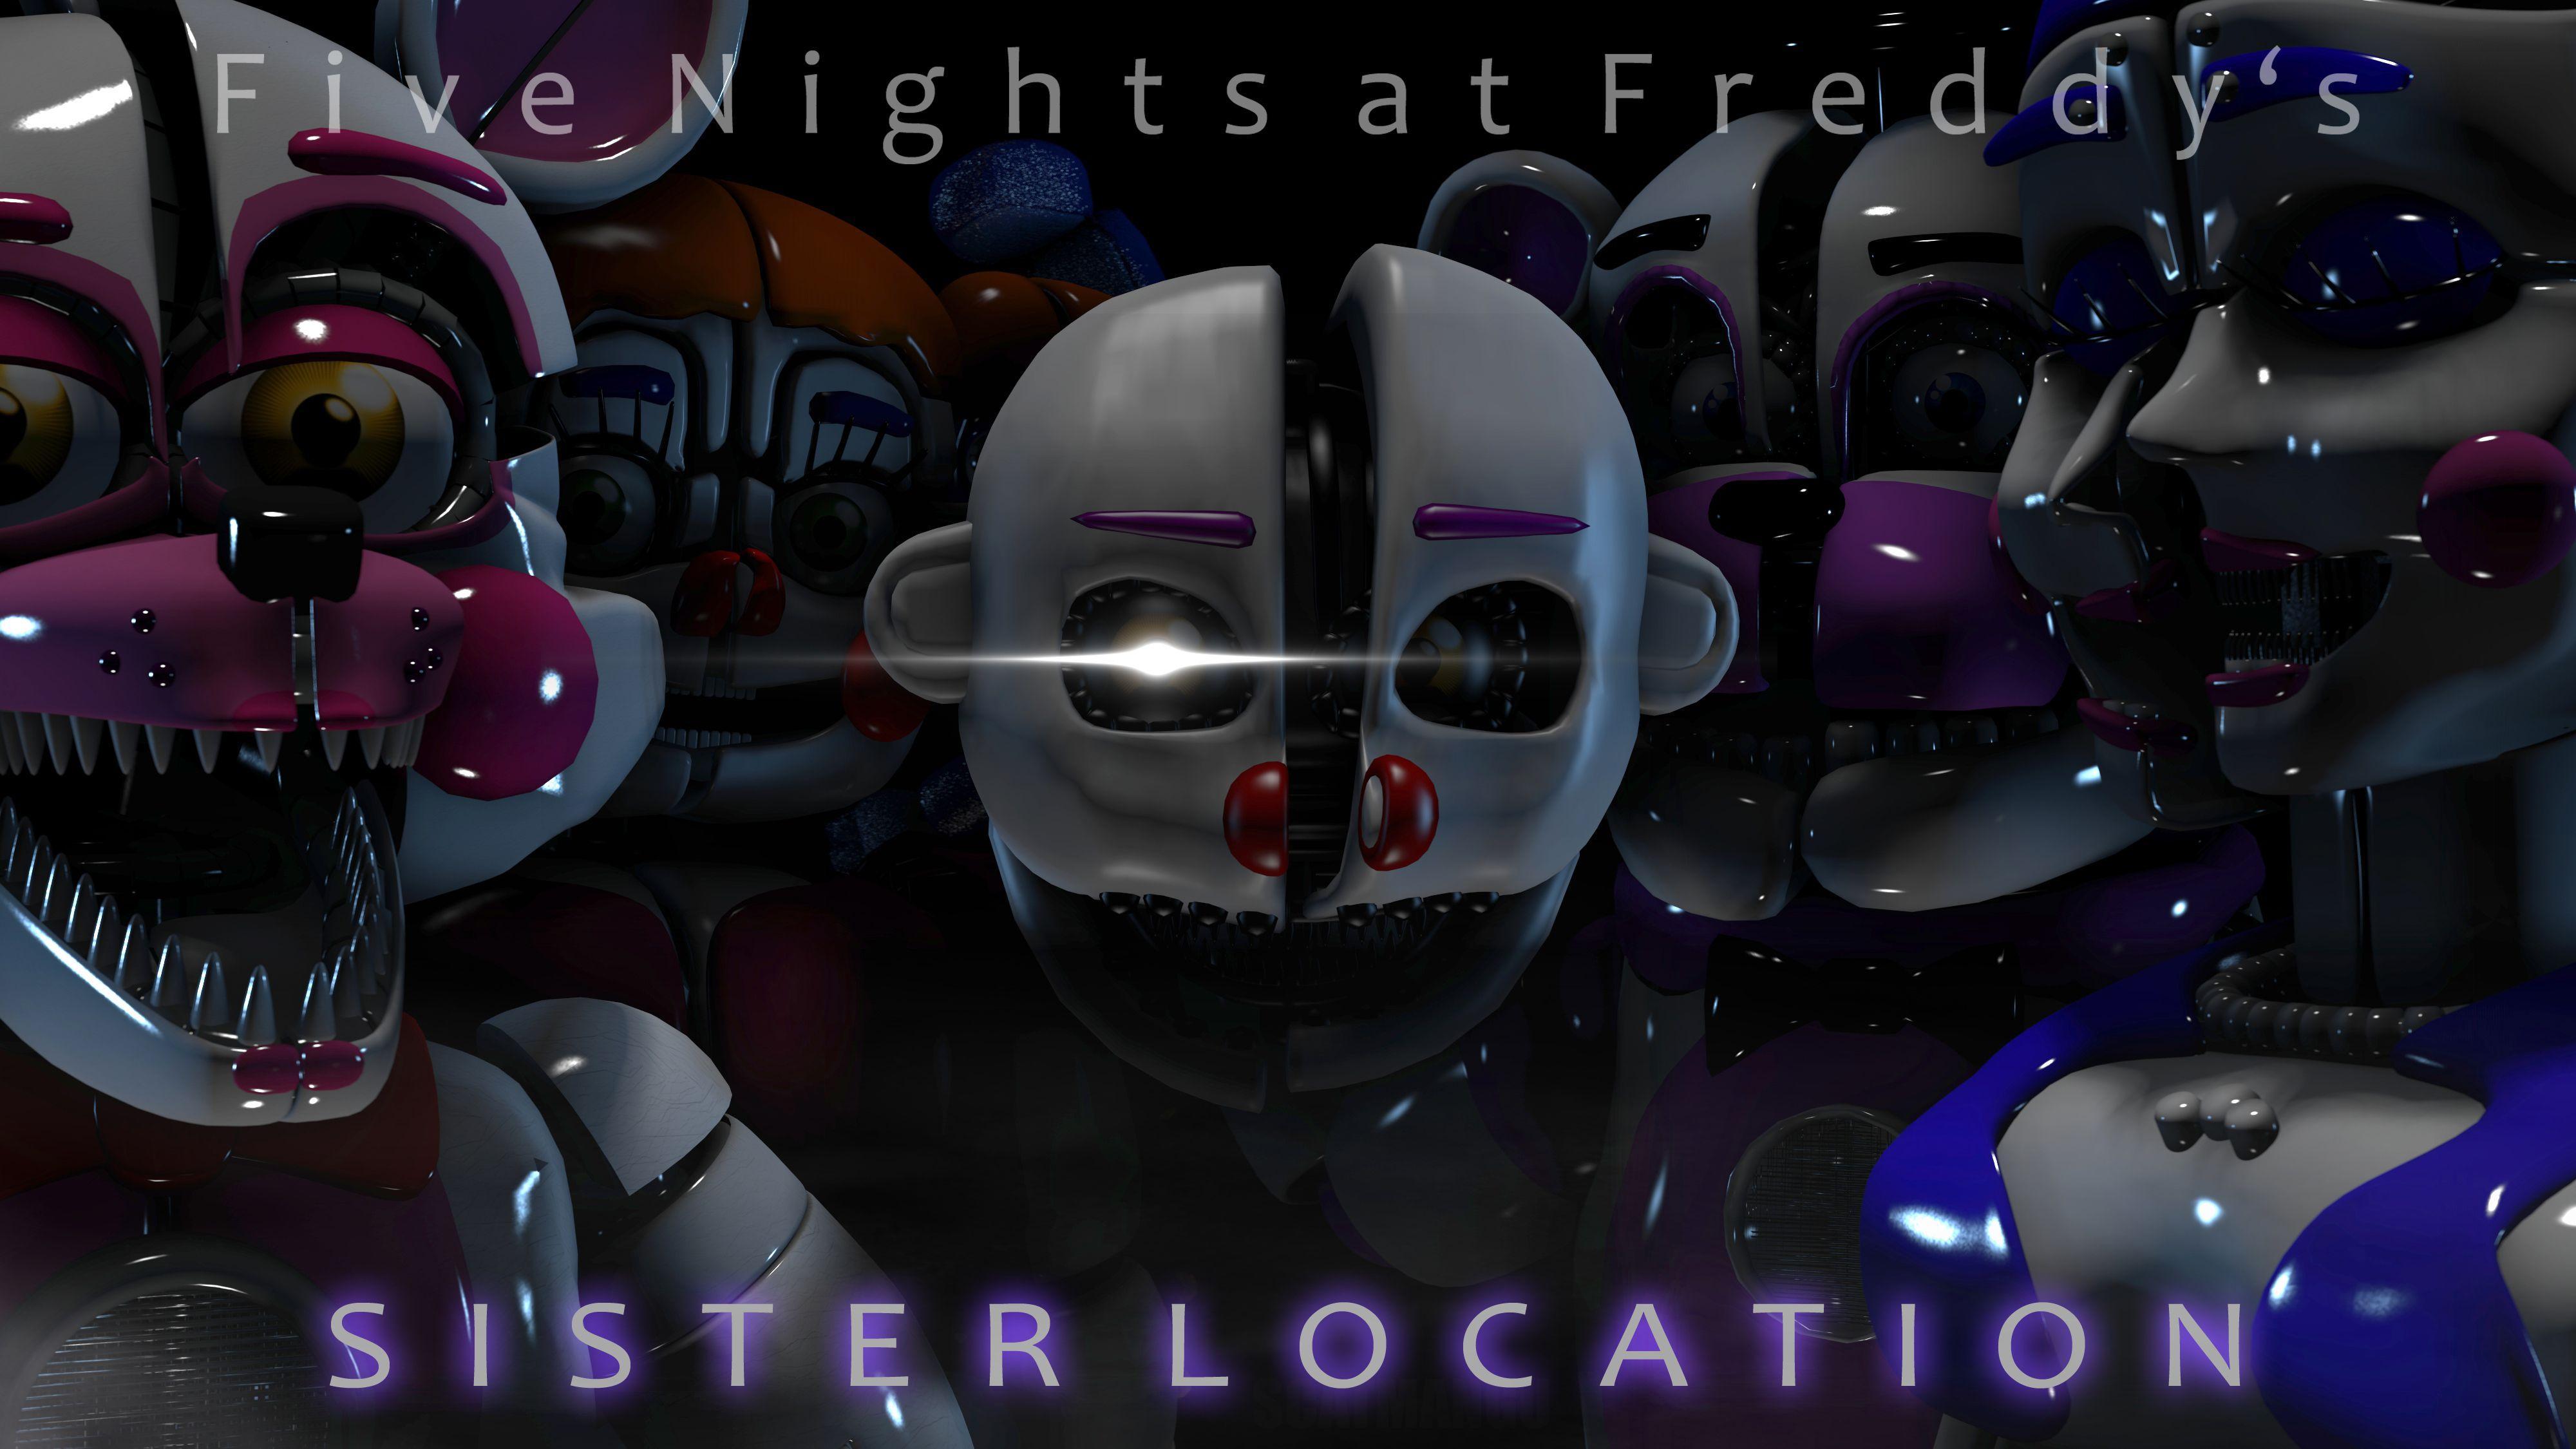 General 4000x2250 Five Nights at Freddy's Sister location Terror video games Scott Cawthon PC gaming